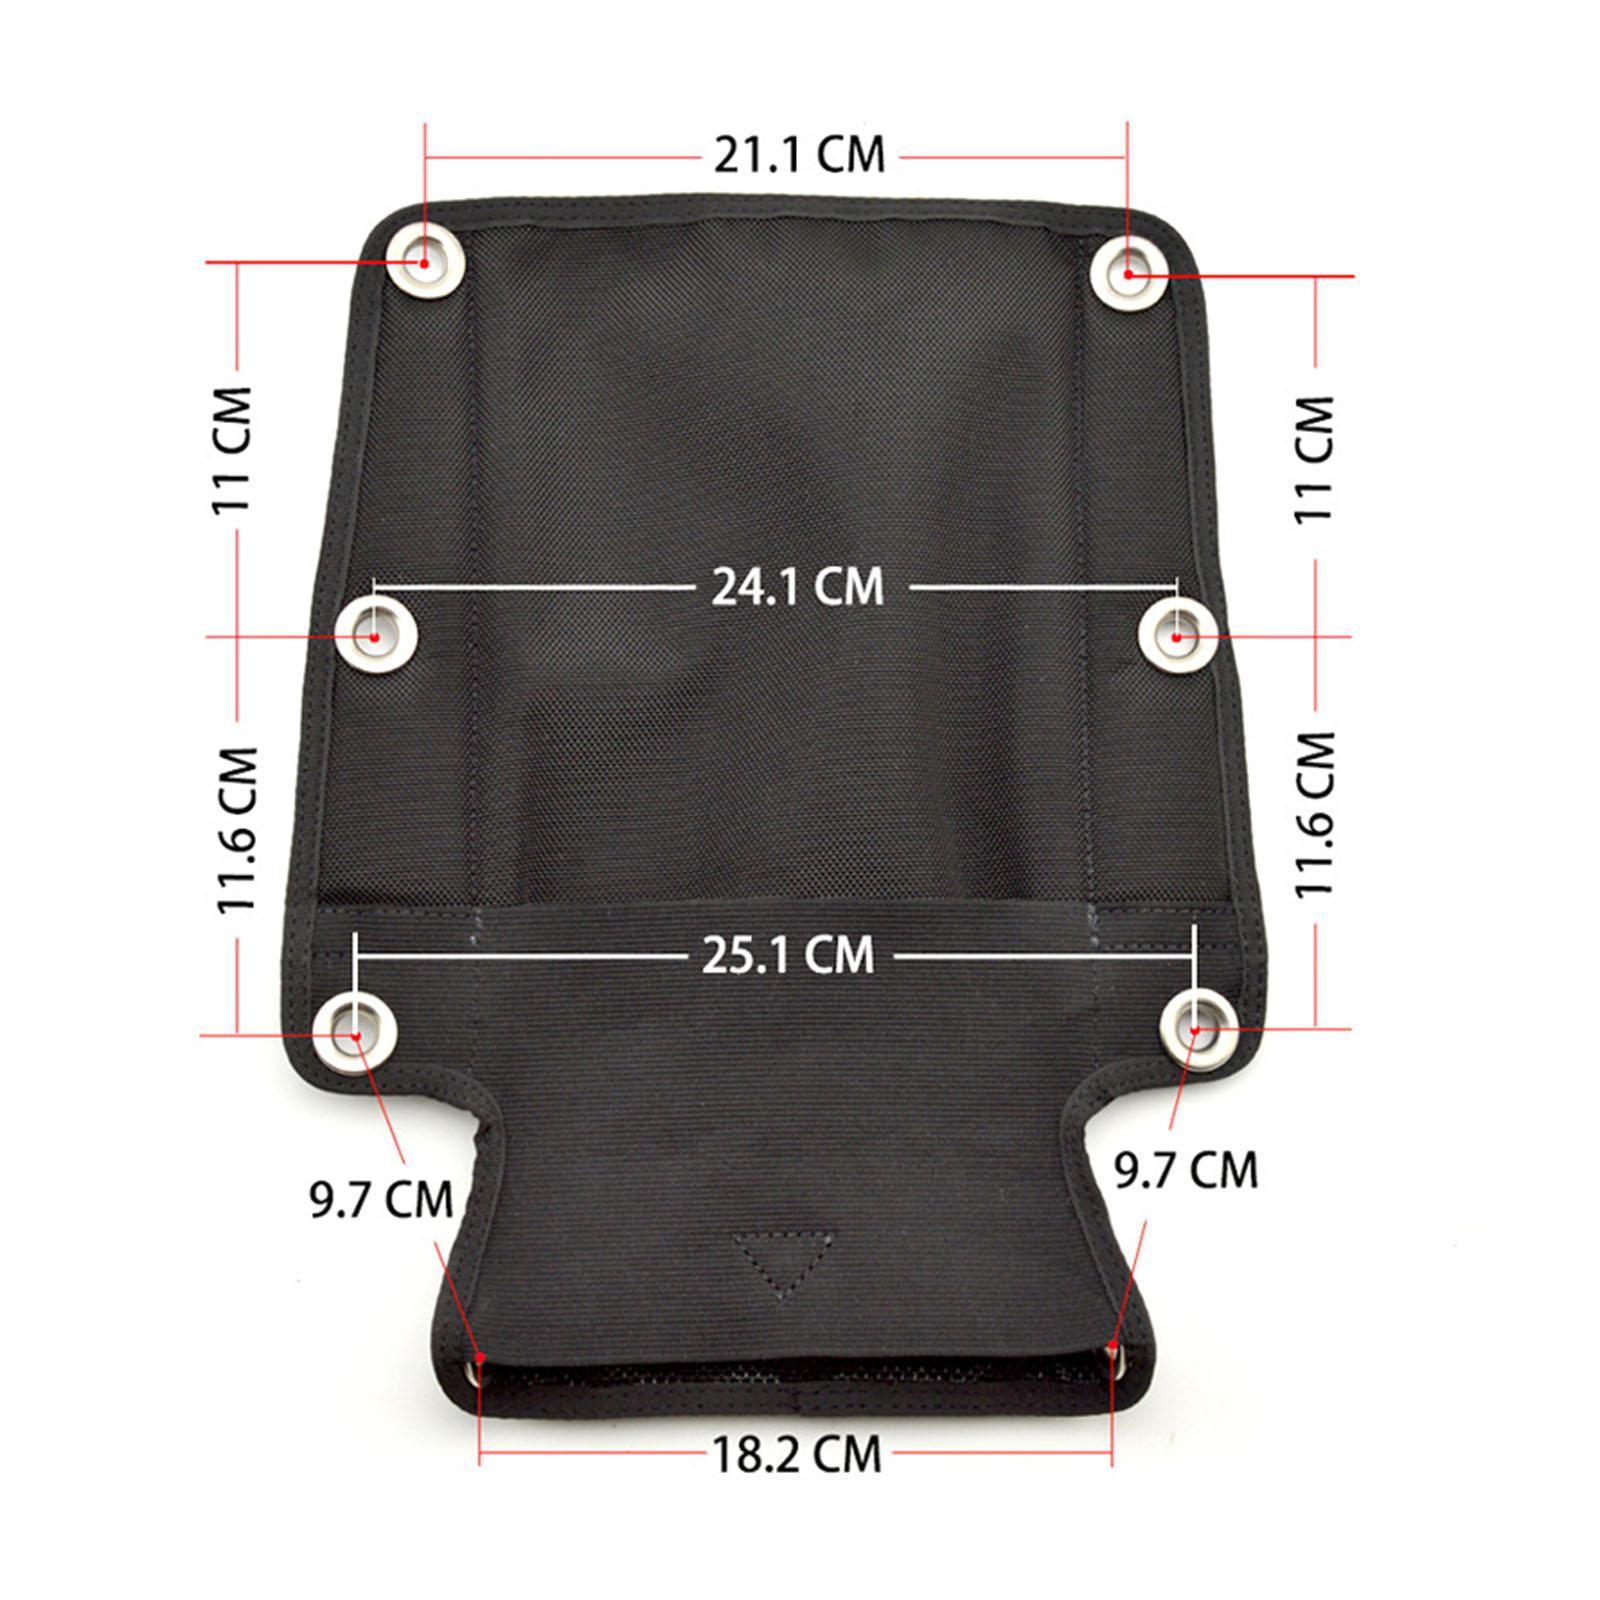 Scuba Diving Backplate Pad with Nylon Screws 1680D Nylon  Pad for Harness